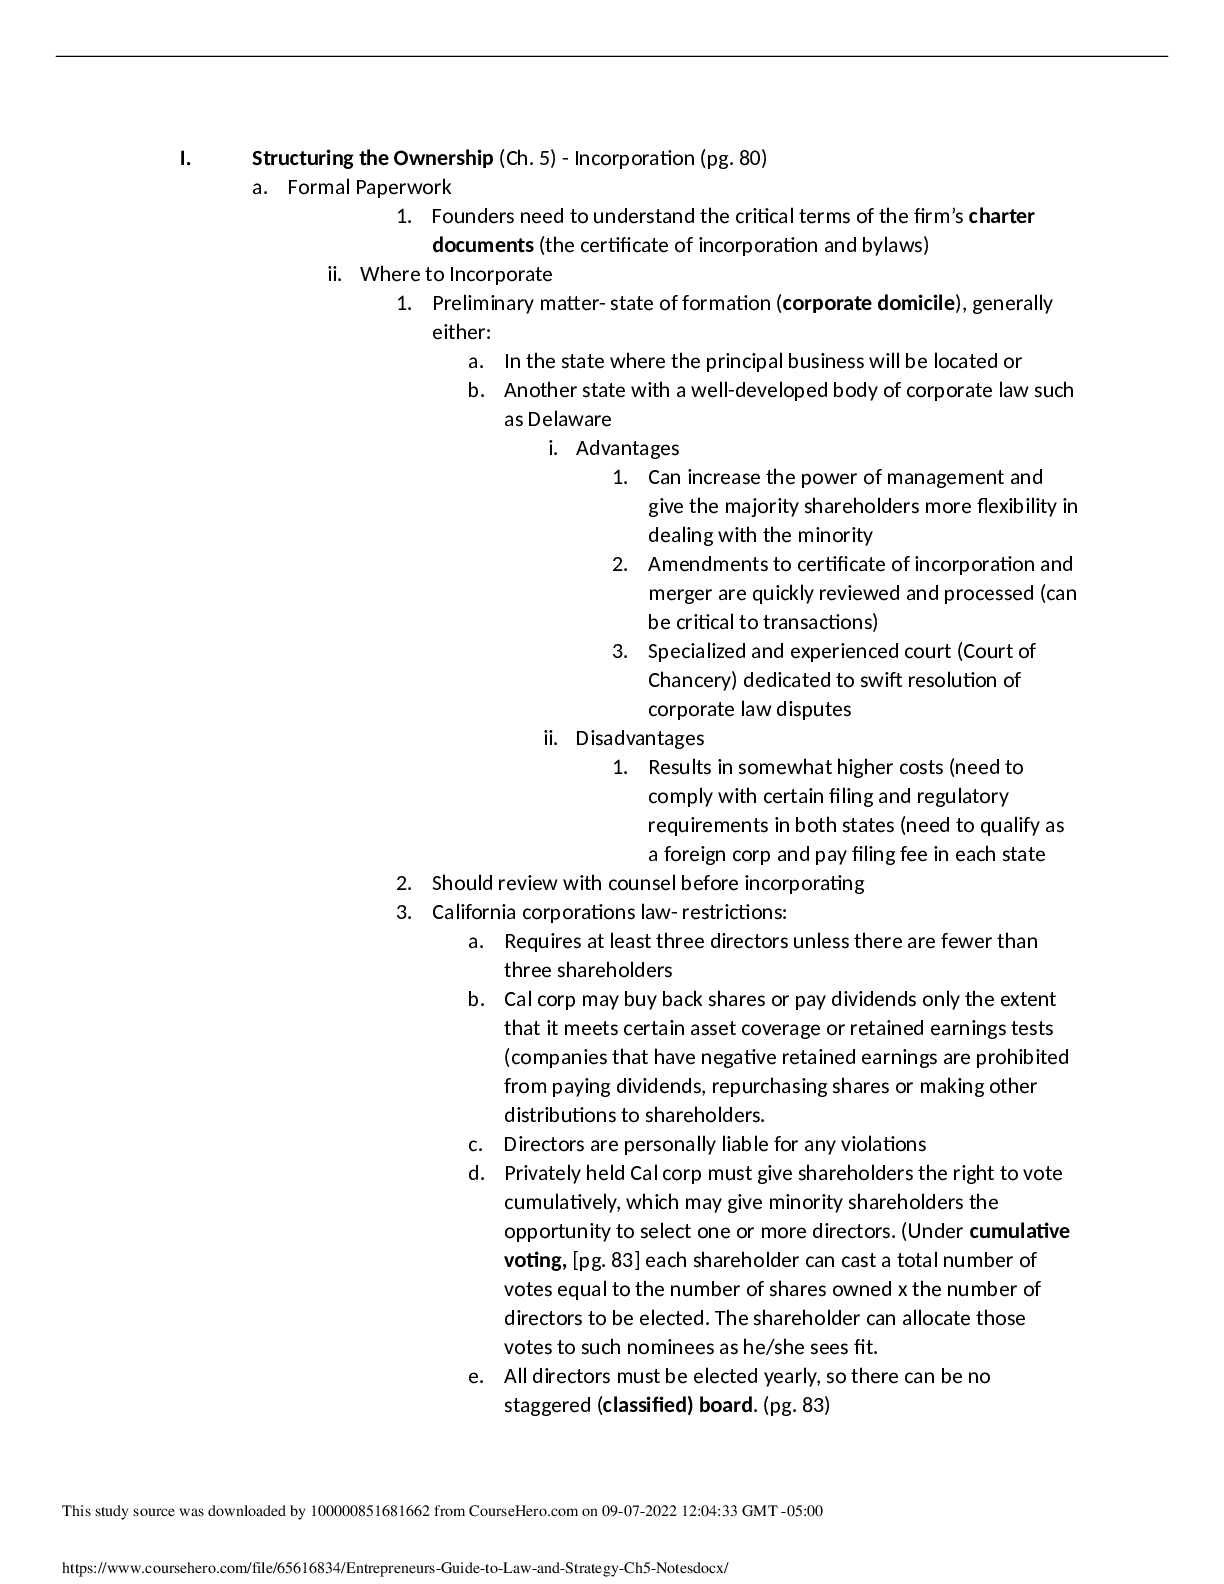 Entrepreneur_s_Guide_to_Law_and_Strategy___Ch5_Notes.docx